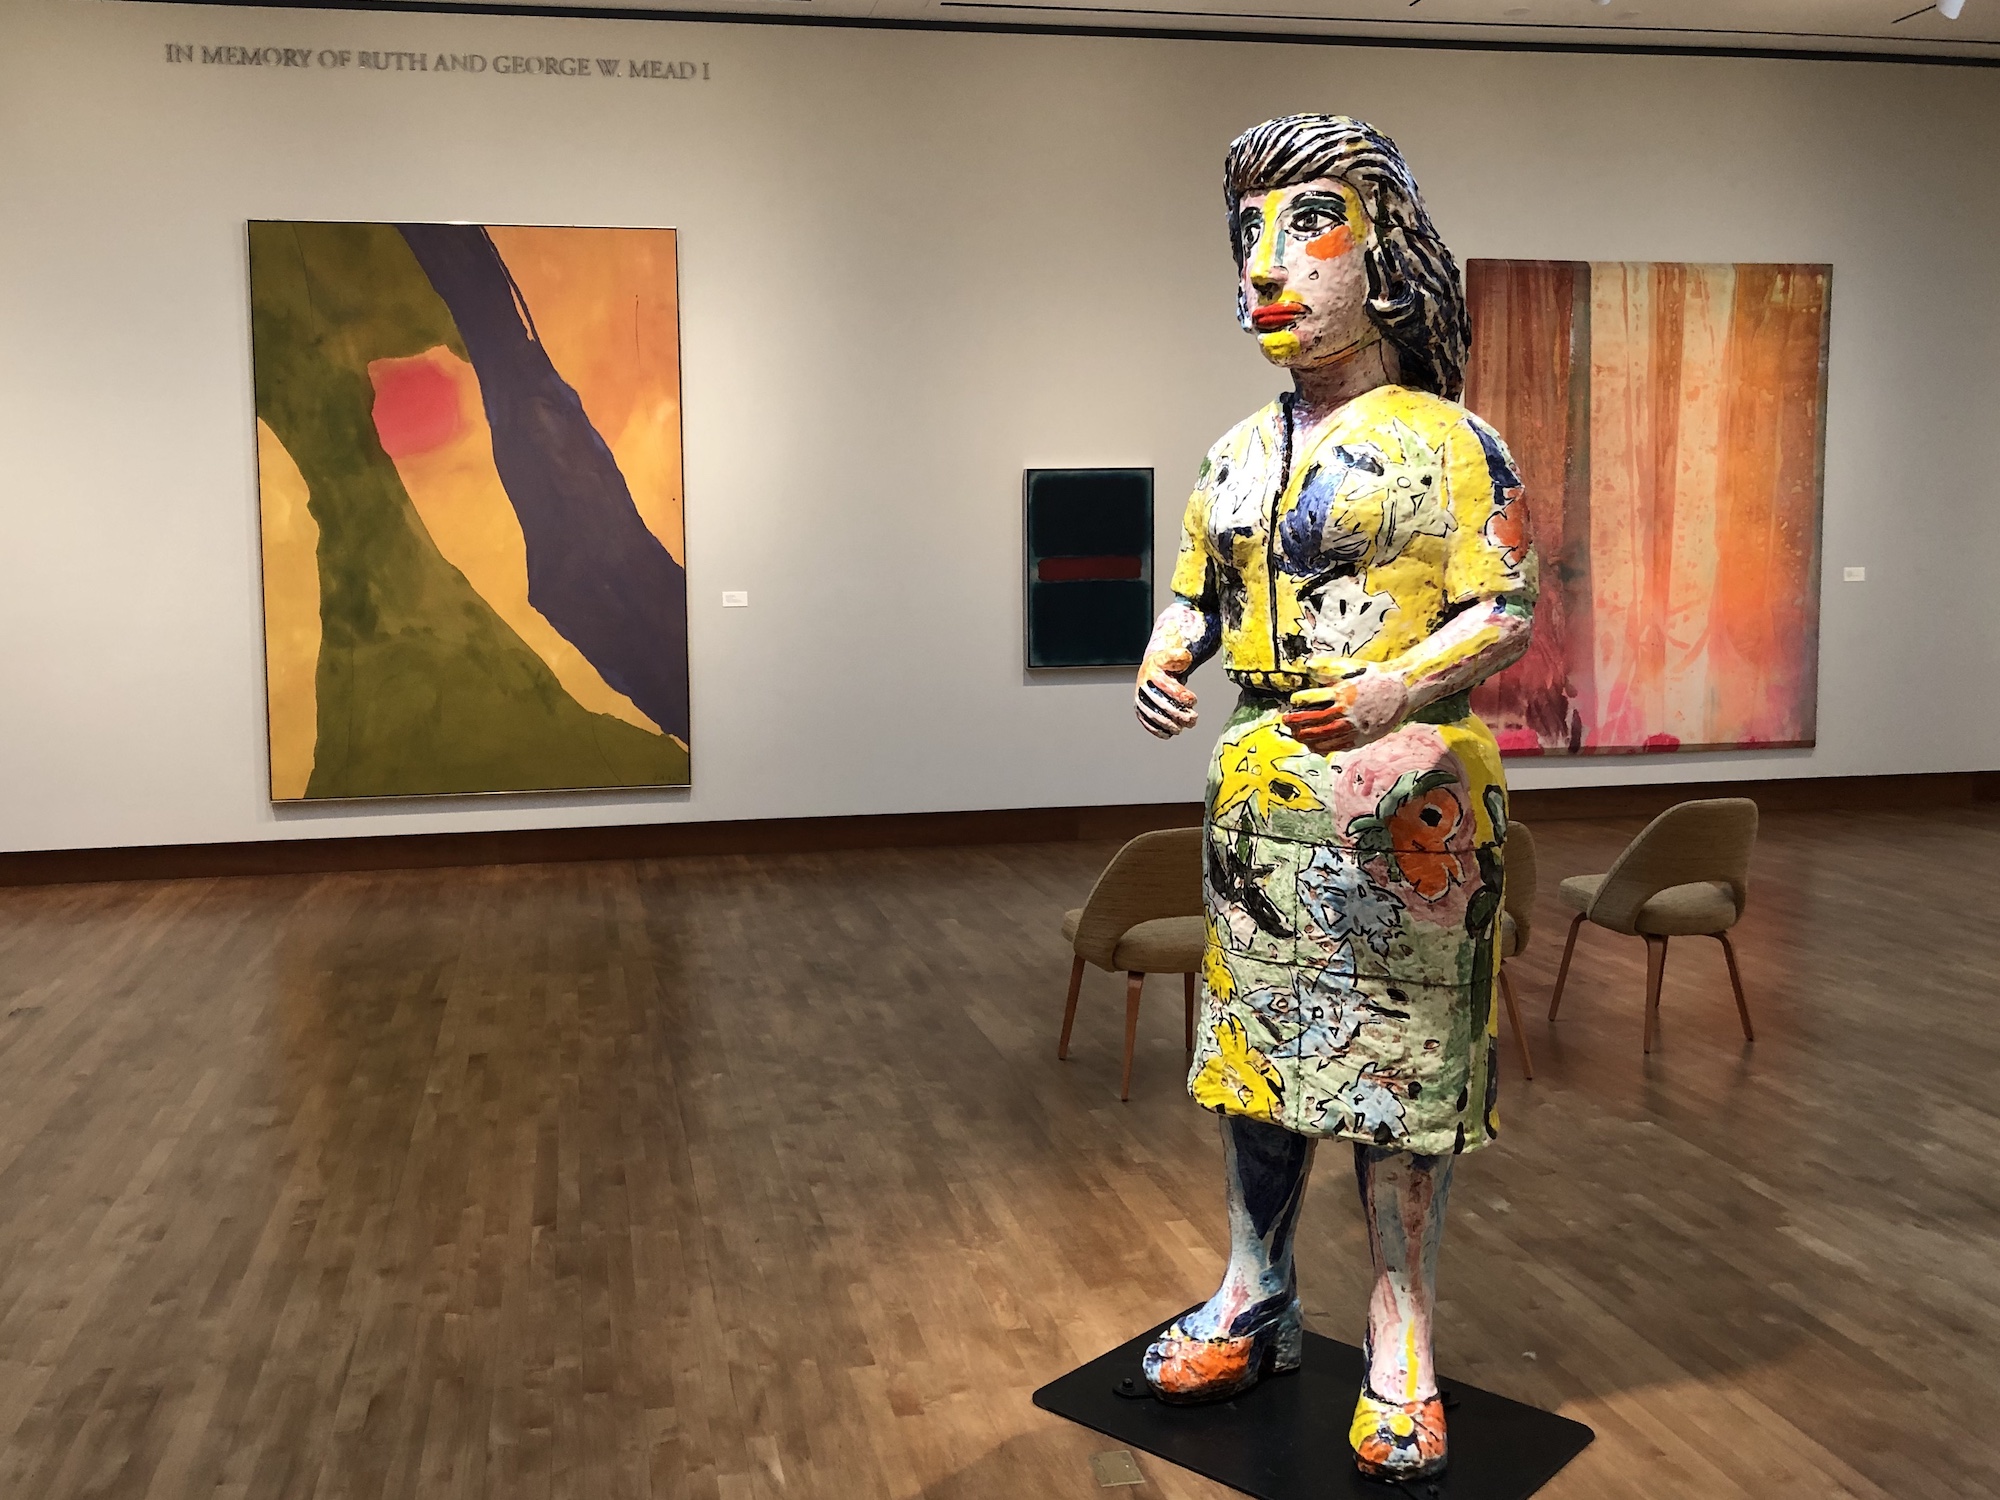 Reflective Woman II by Viola Frey at the Chazen Museum of Art in Madison Wisconsin.